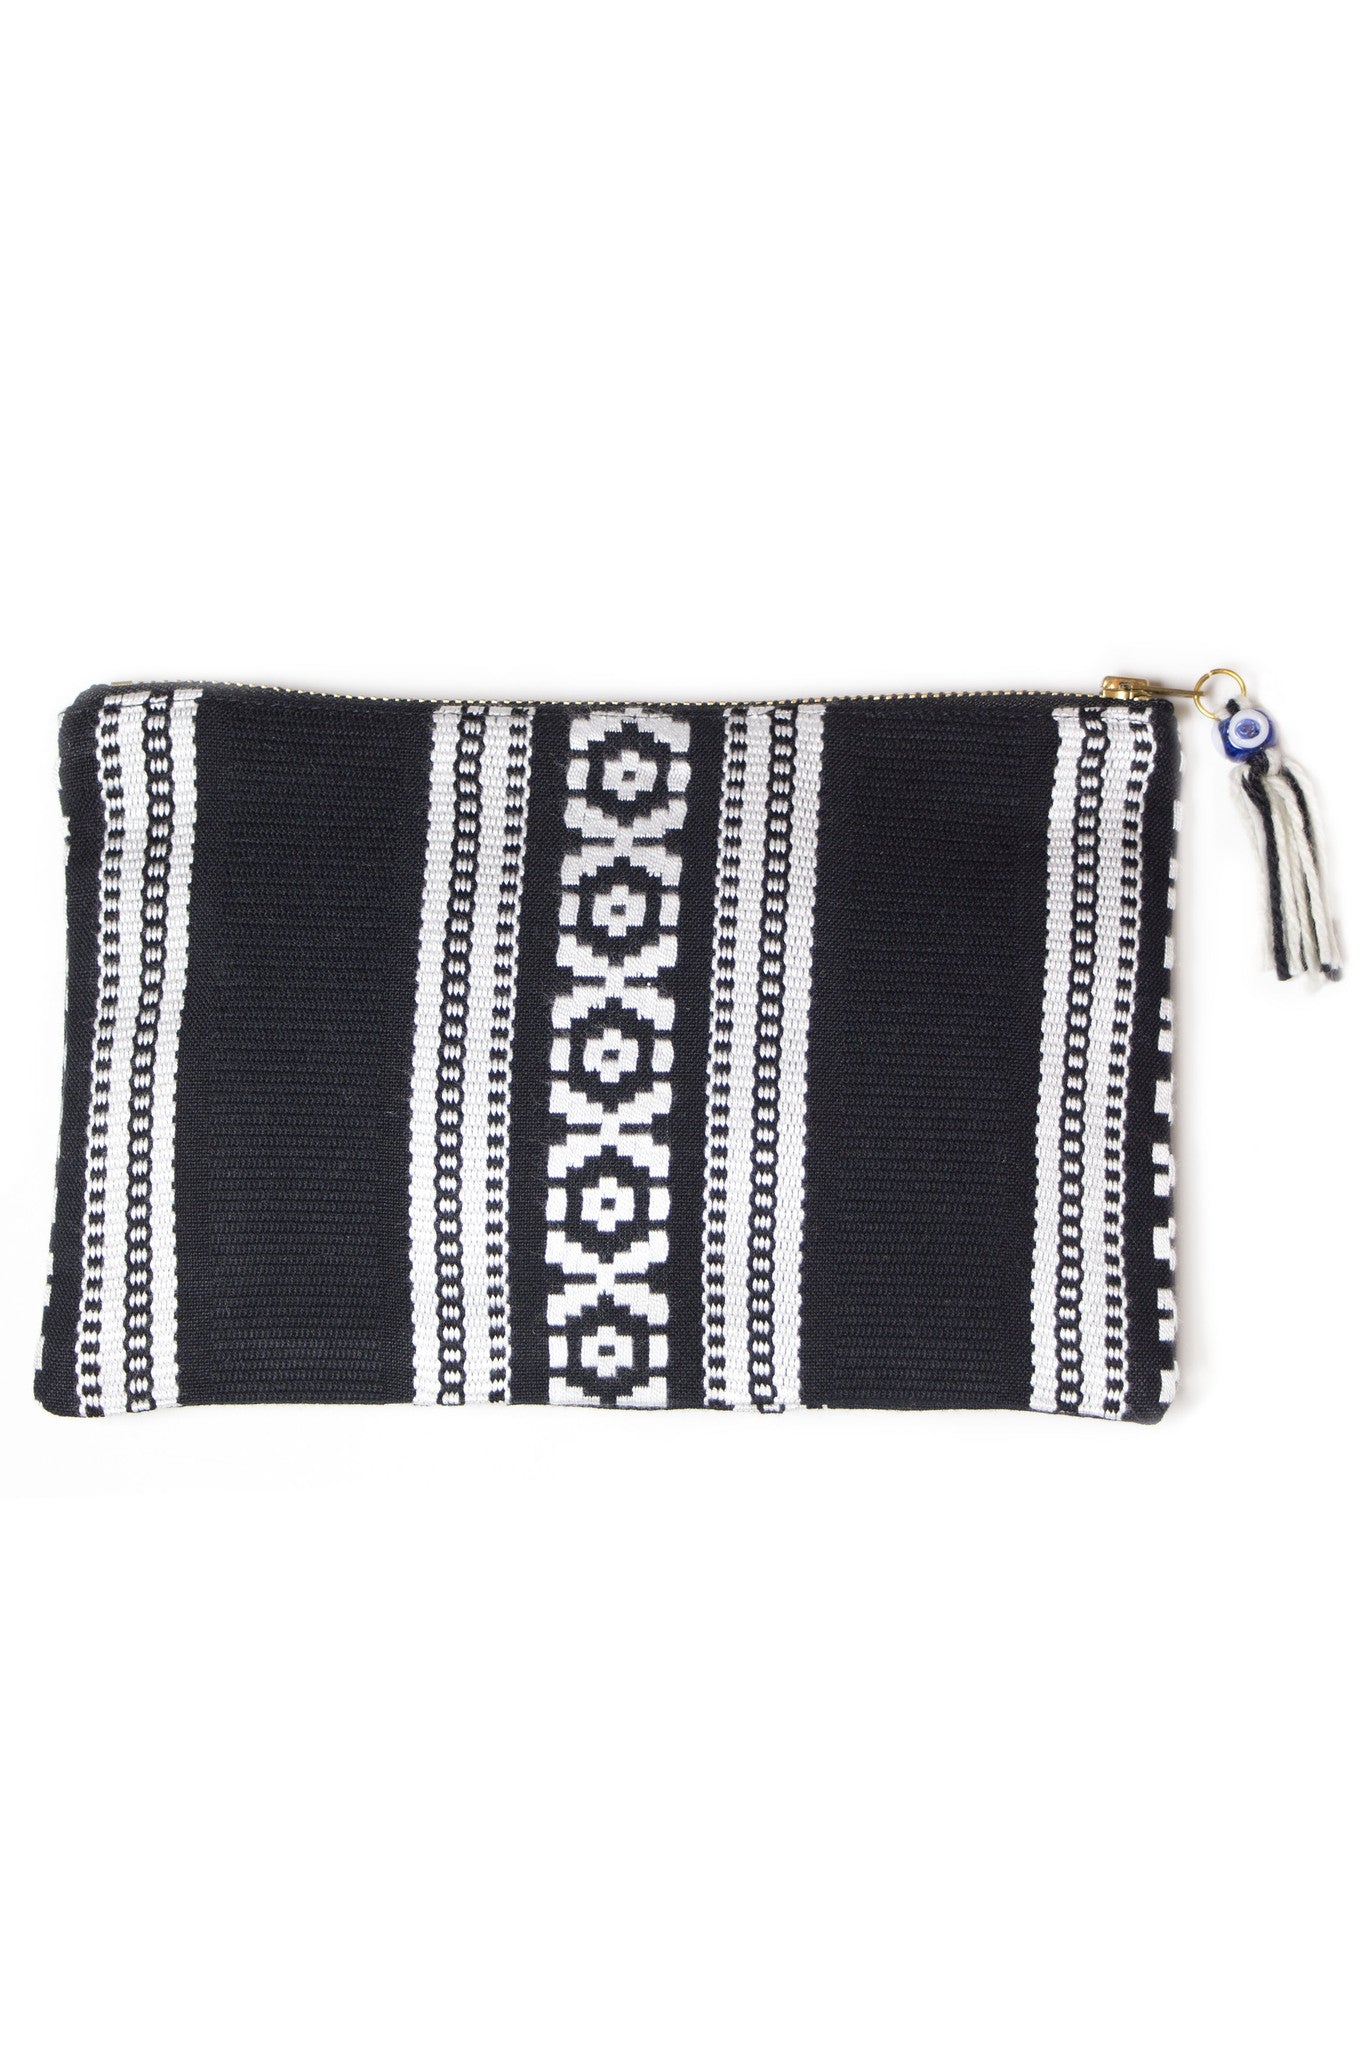 Elina Lebessi Elektra Pochette in Black. Black and white woven pattern; zip closure with small tassel. Handcrafted by artisans in rural areas in a small workshop outside of Crete. Waterproof interior lining making it the perfect travel accessory for packing toiletries or swimsuits. Small measures 5.5 inches by 8.5 inches. Large measures  8.5 inches by 11 inches. Color black. Sizes Small Large.